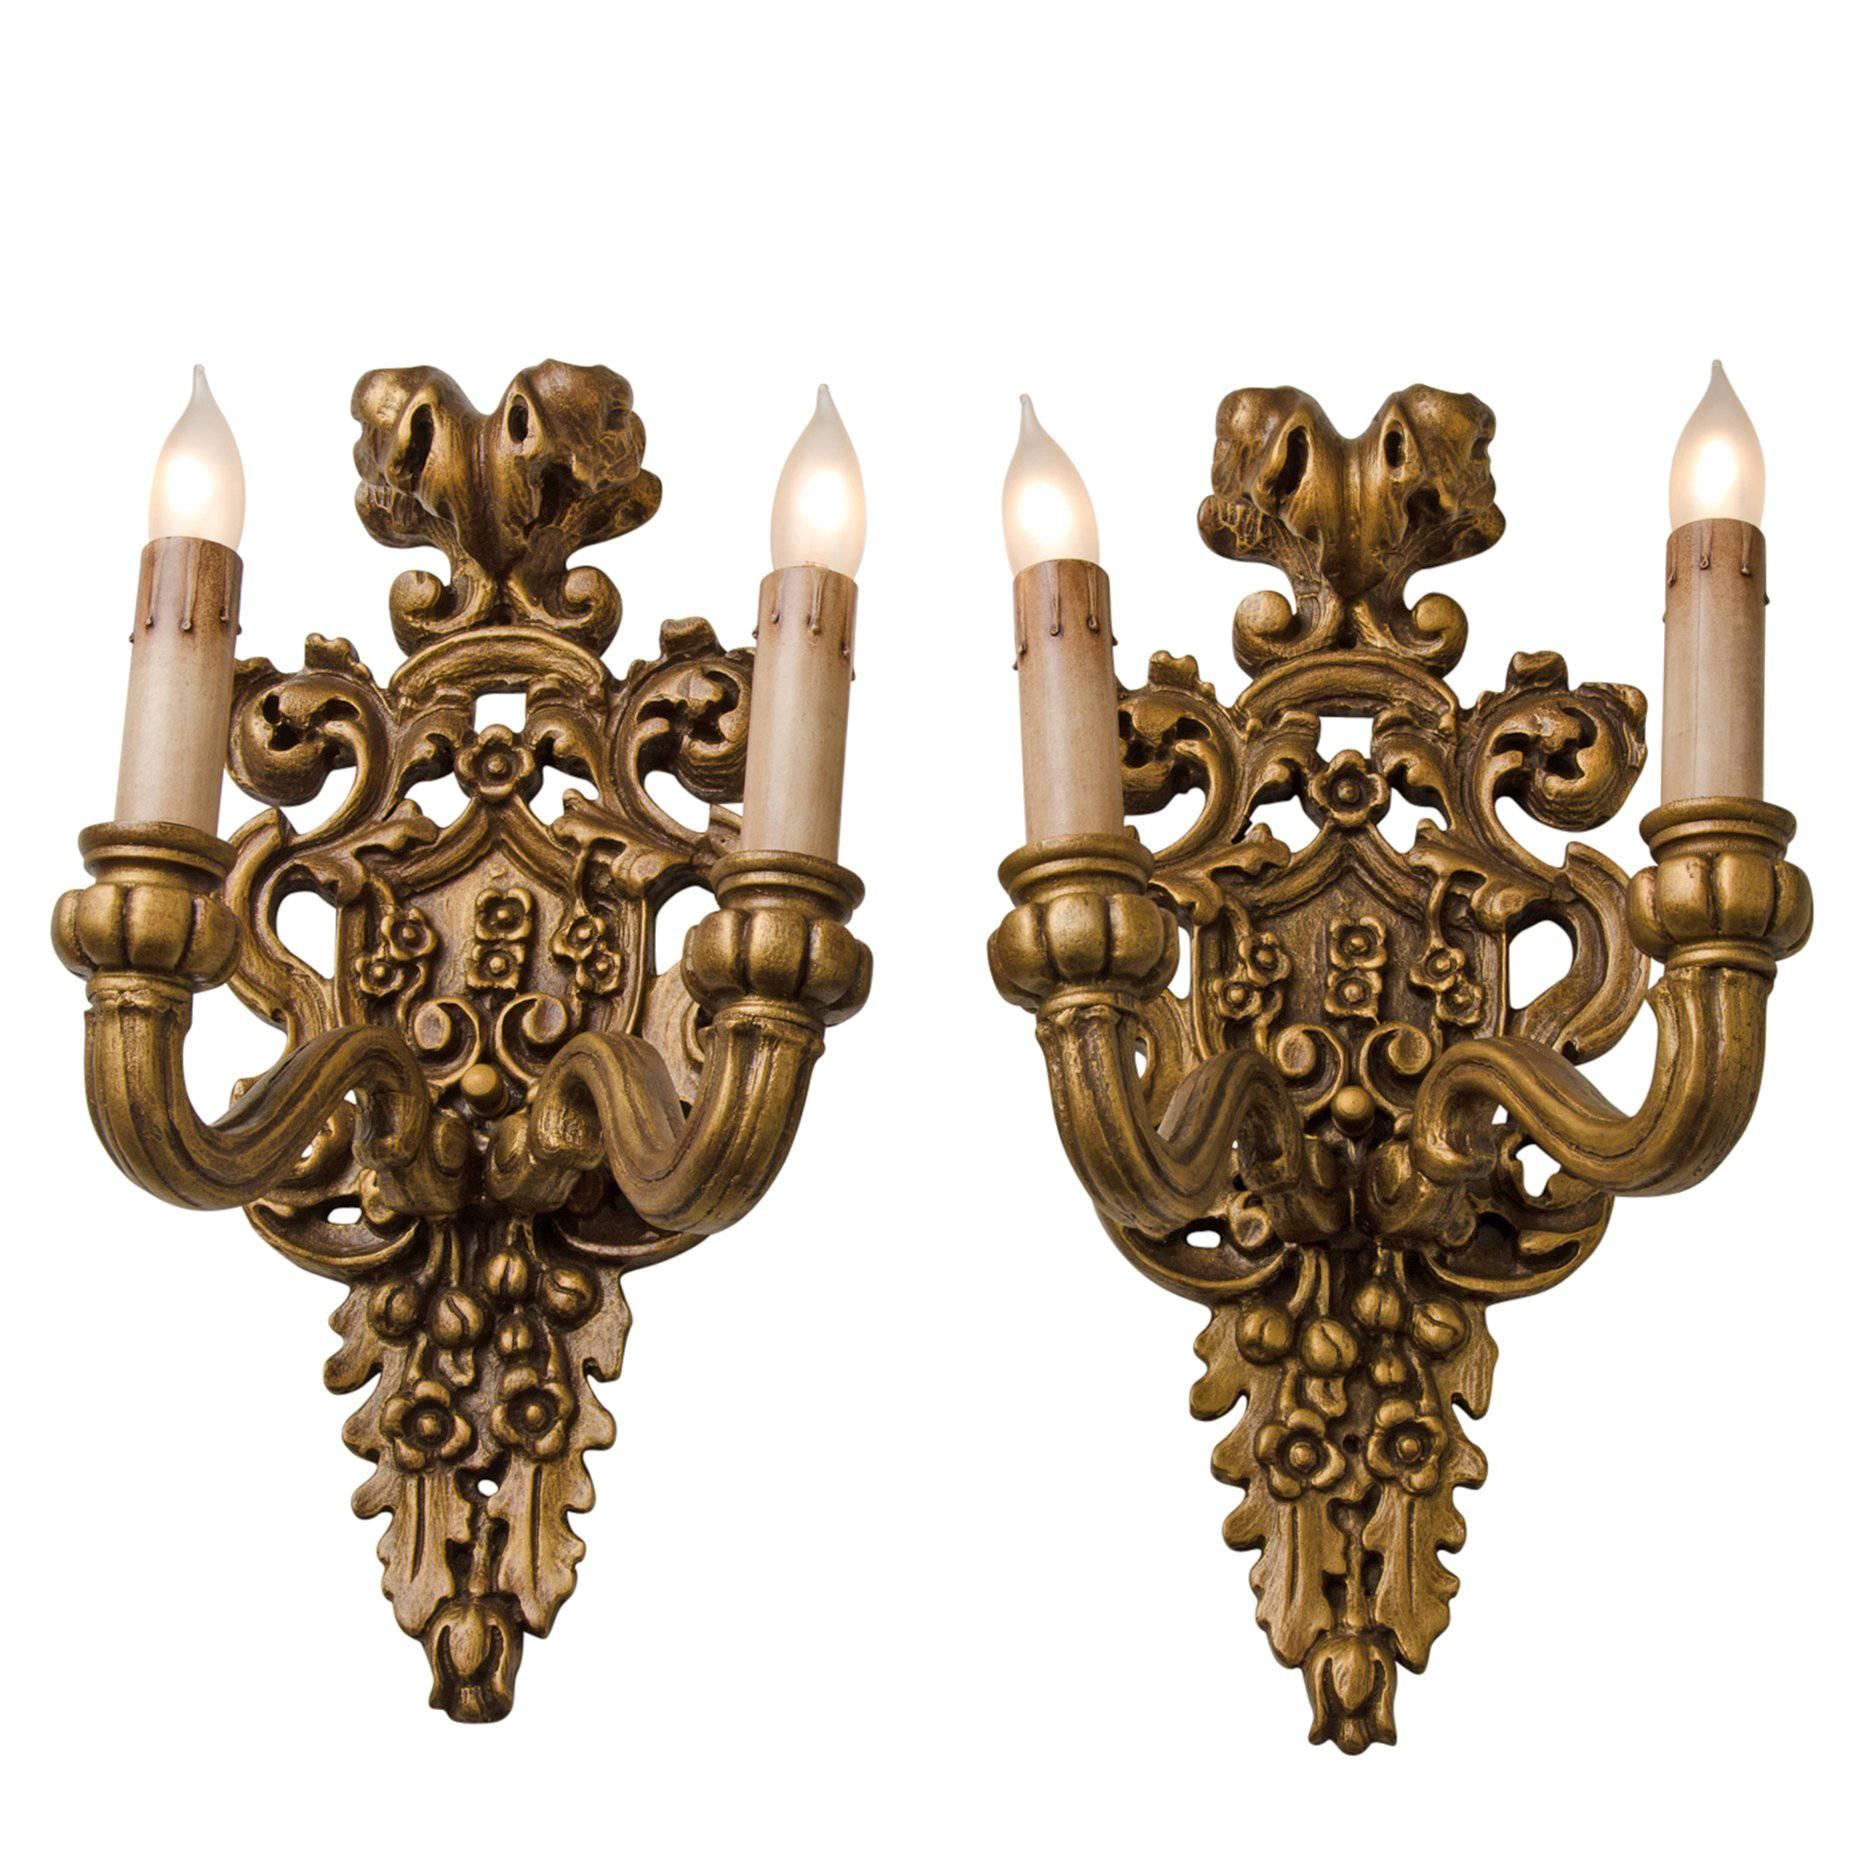 Pair of Carved Classical Revival Candle Sconces, circa 1910s For Sale